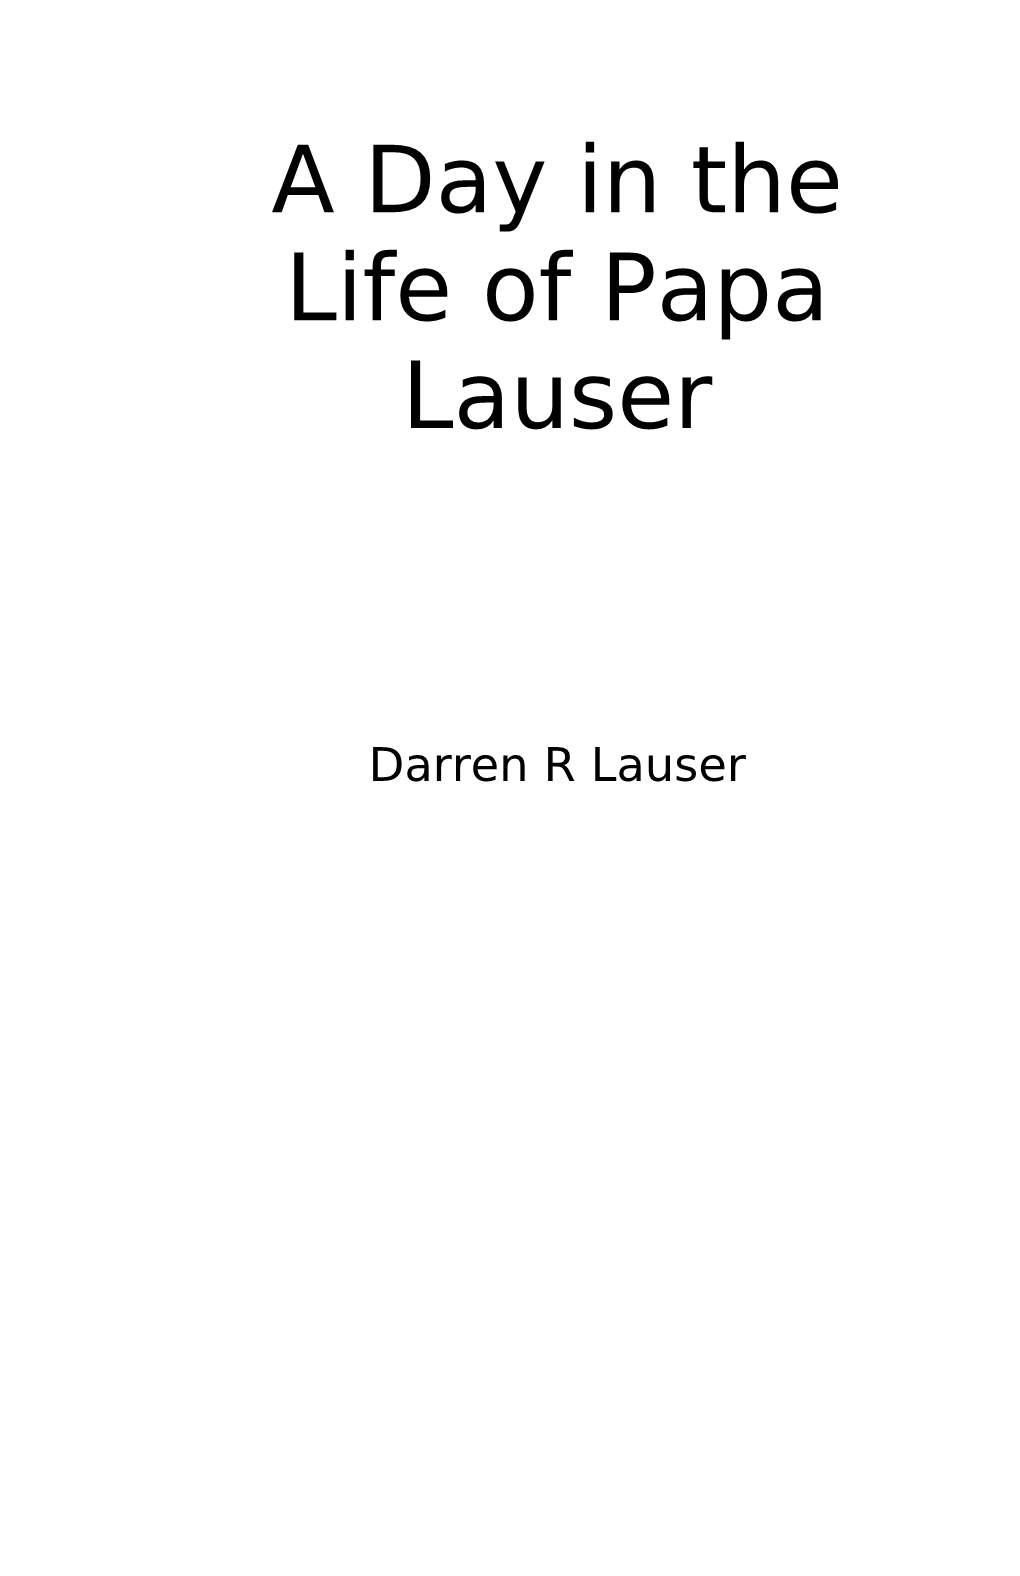 A Day in the Life of Papa Lauser